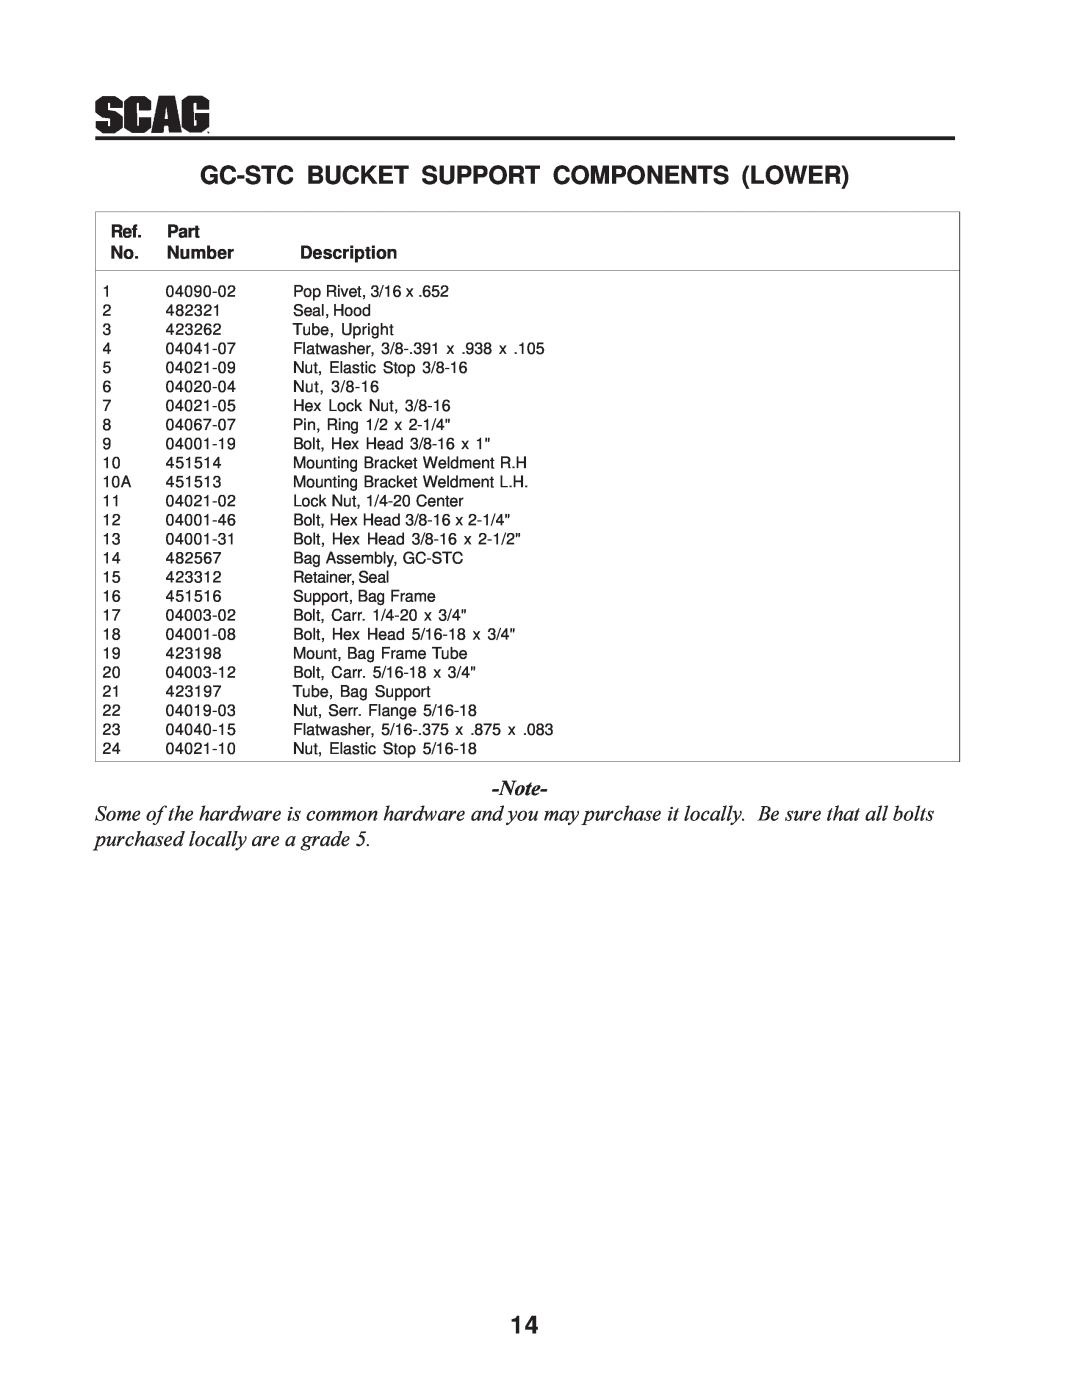 Scag Power Equipment GC-STC manual Gc-Stc Bucket Support Components Lower, Part, Number, Description 